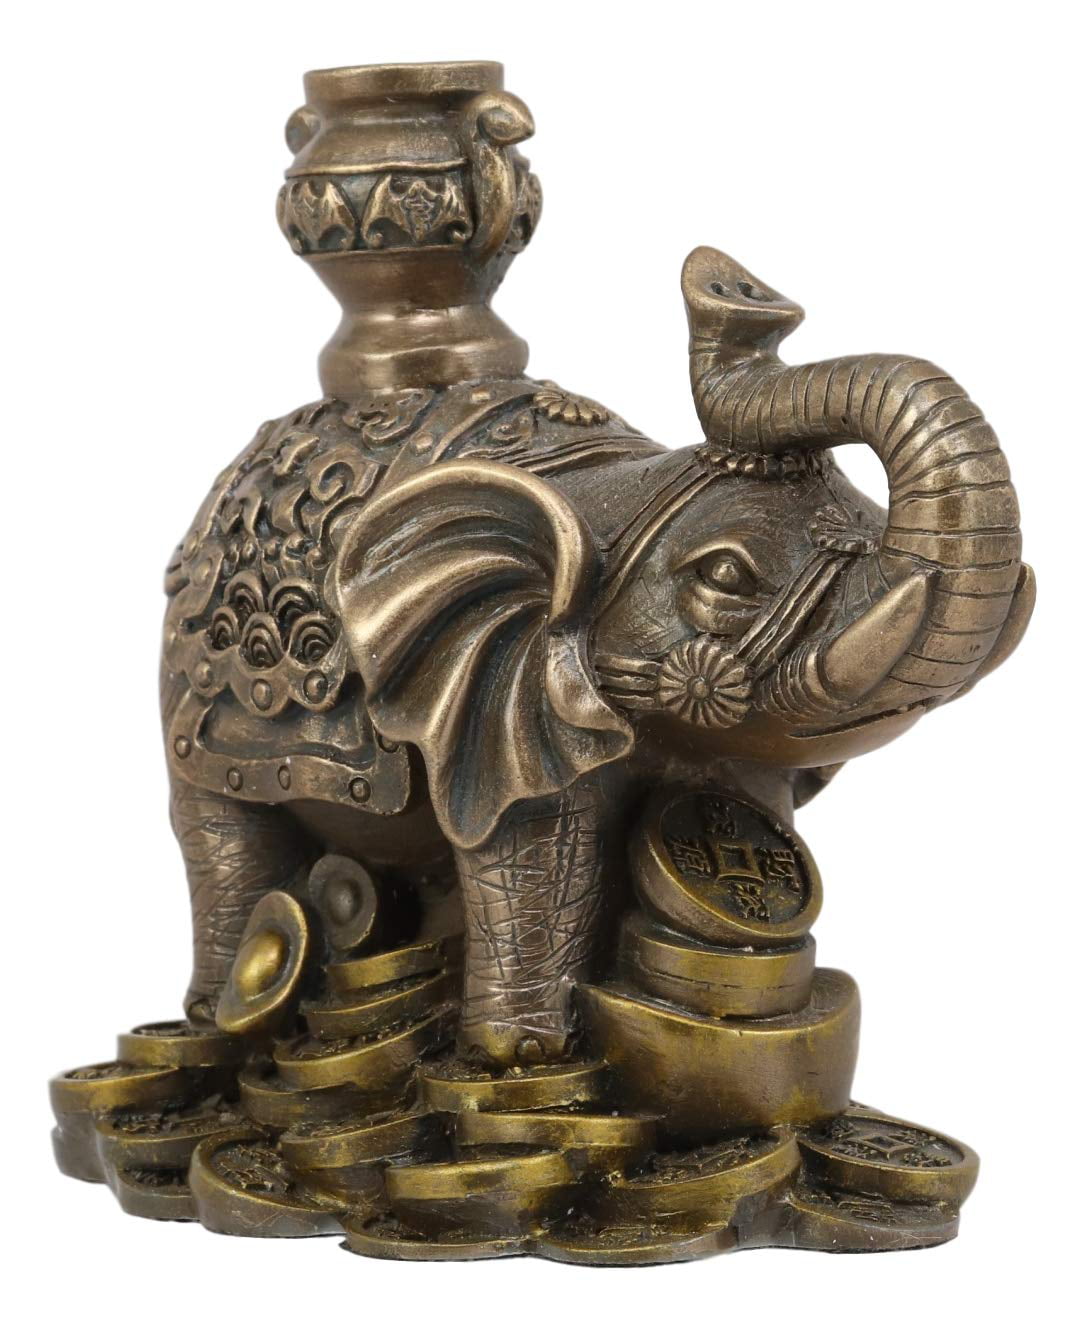 Feng Shui Decor Attract Wealth and Good Luck 13.5x7x12cm Figurines Carved 